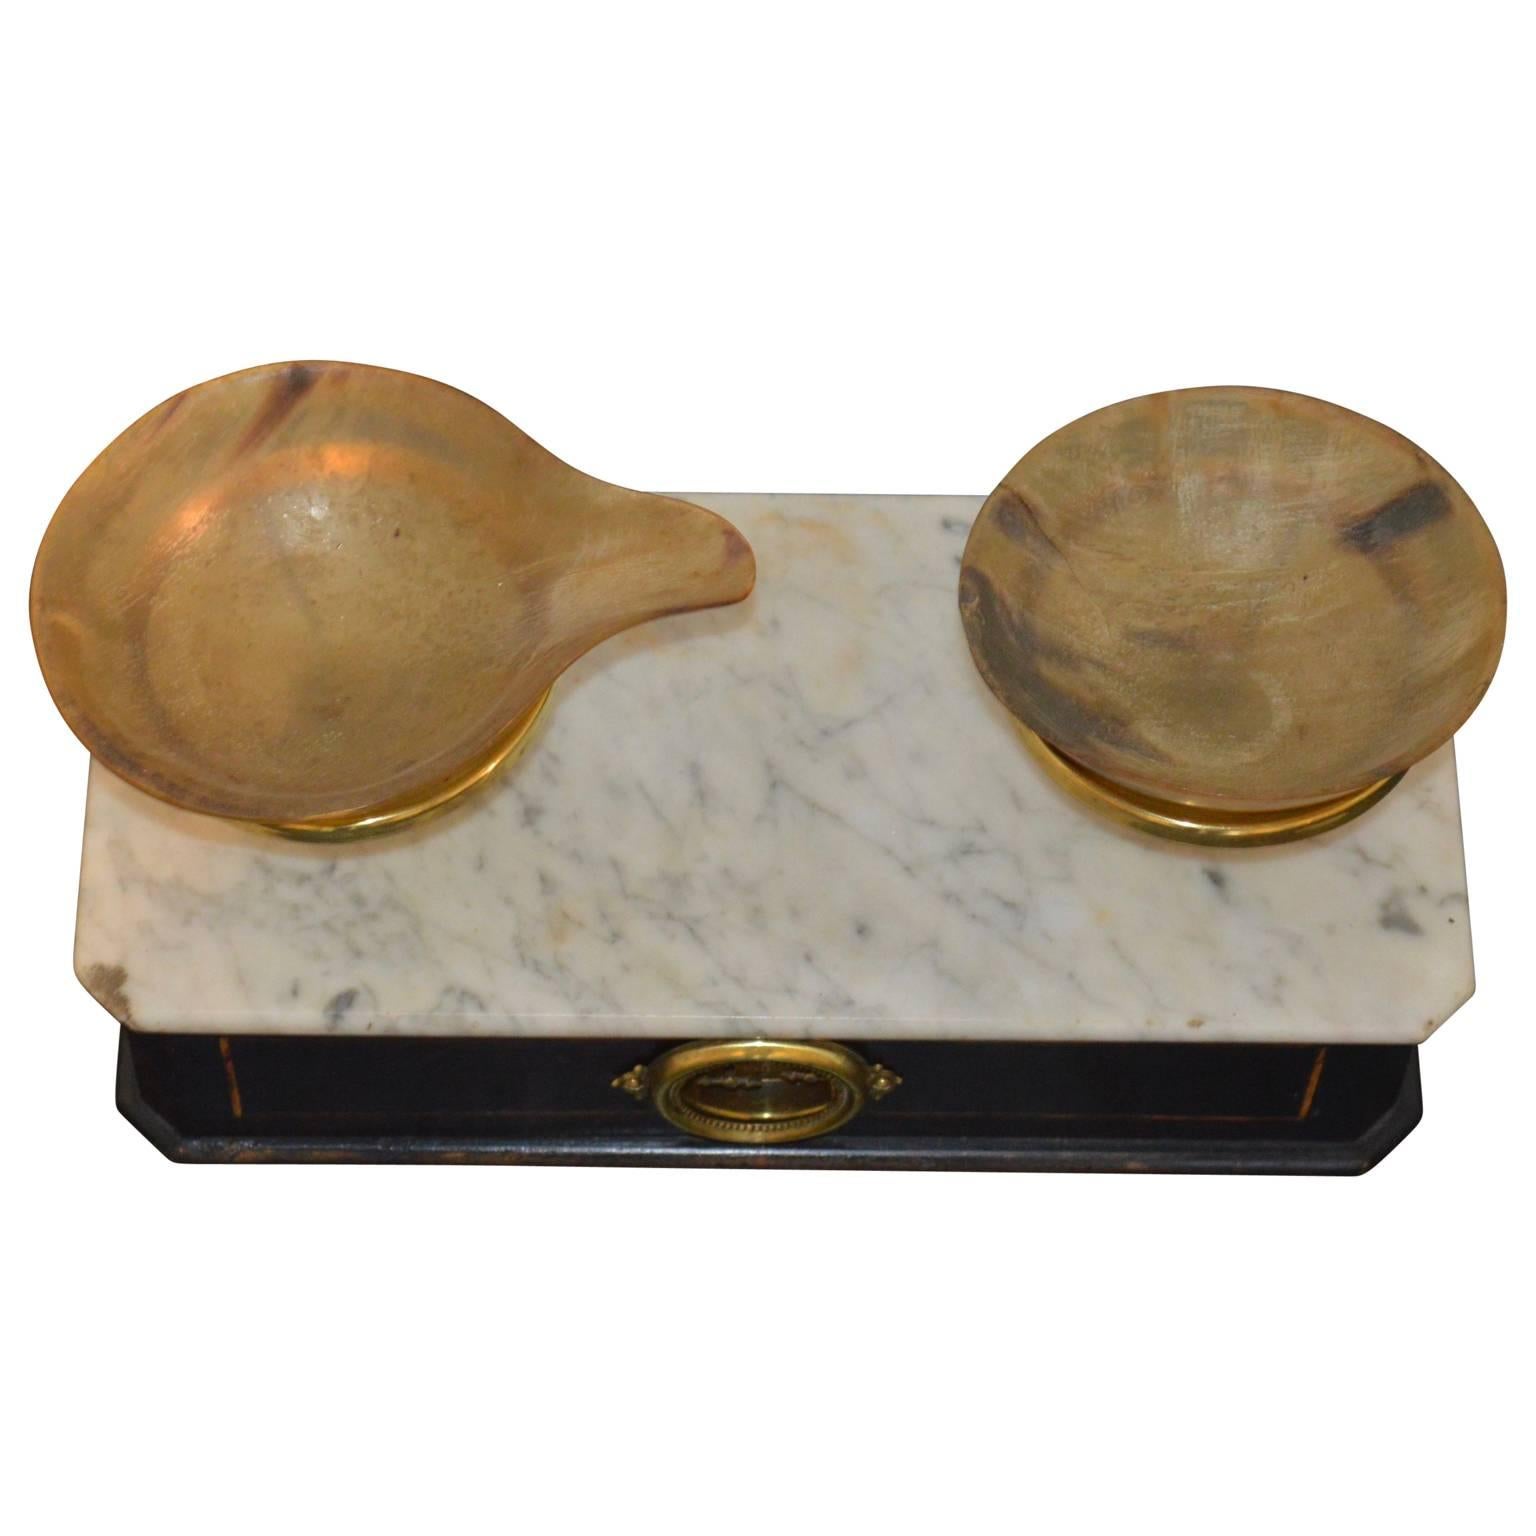 Napoleon III 19th Century Apothecary or Pastry Weight with Horn Bowls